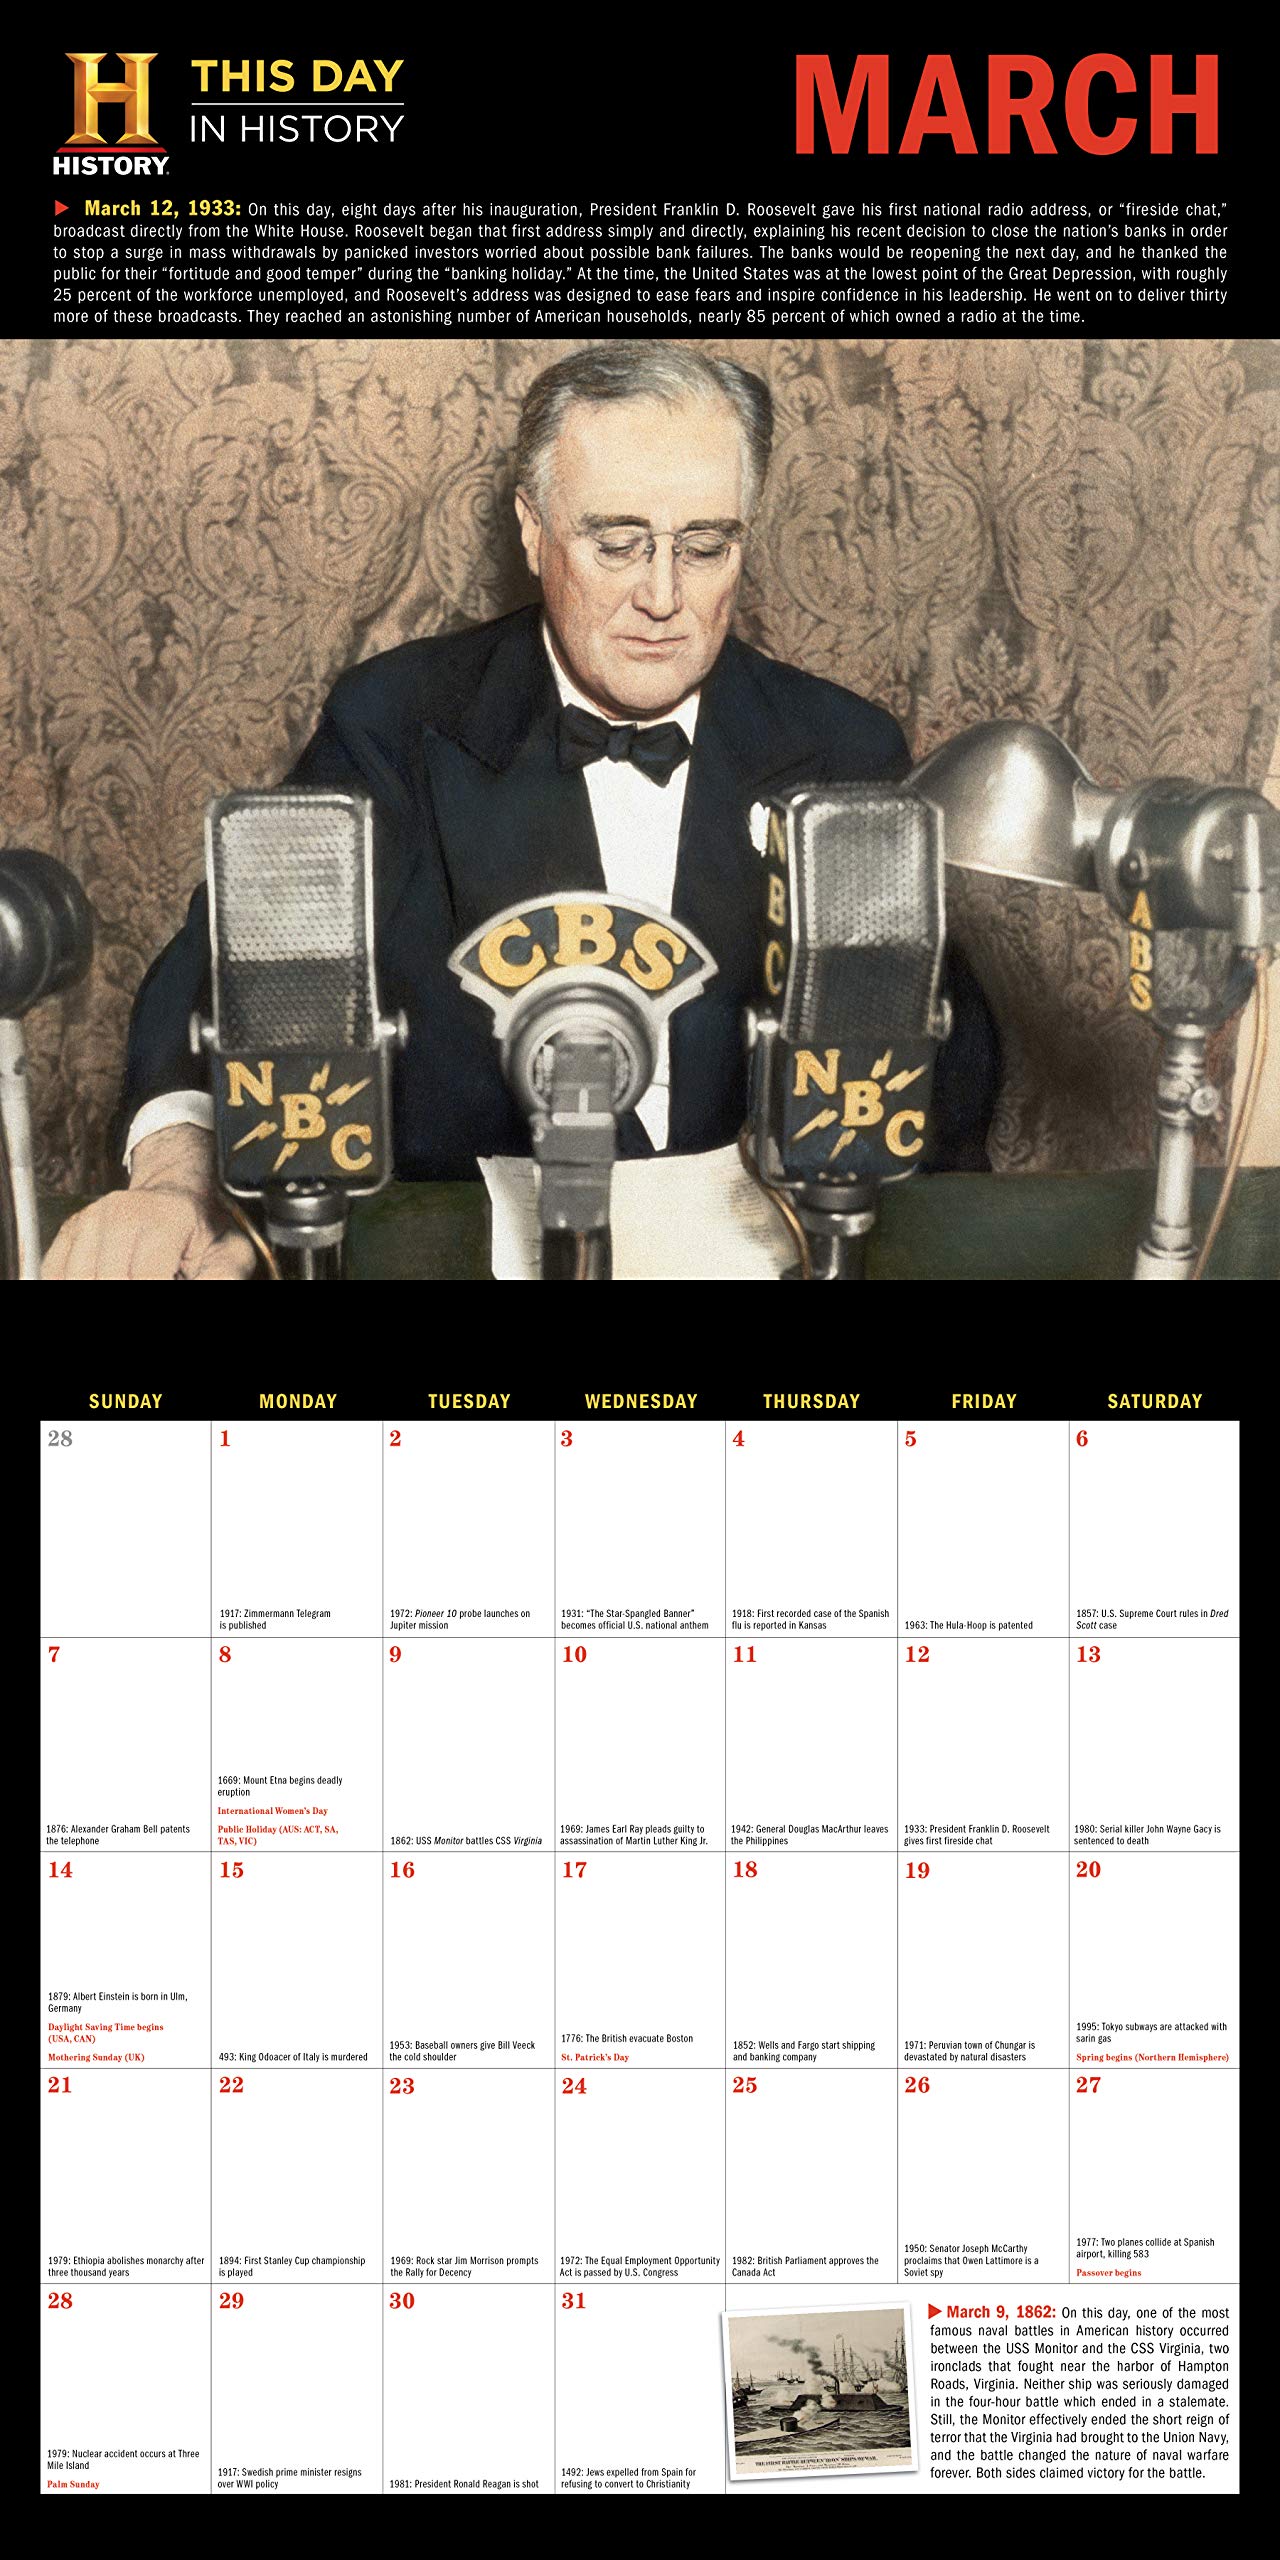 History Channel This Day in History Wall Calendar: 365 Remarkable